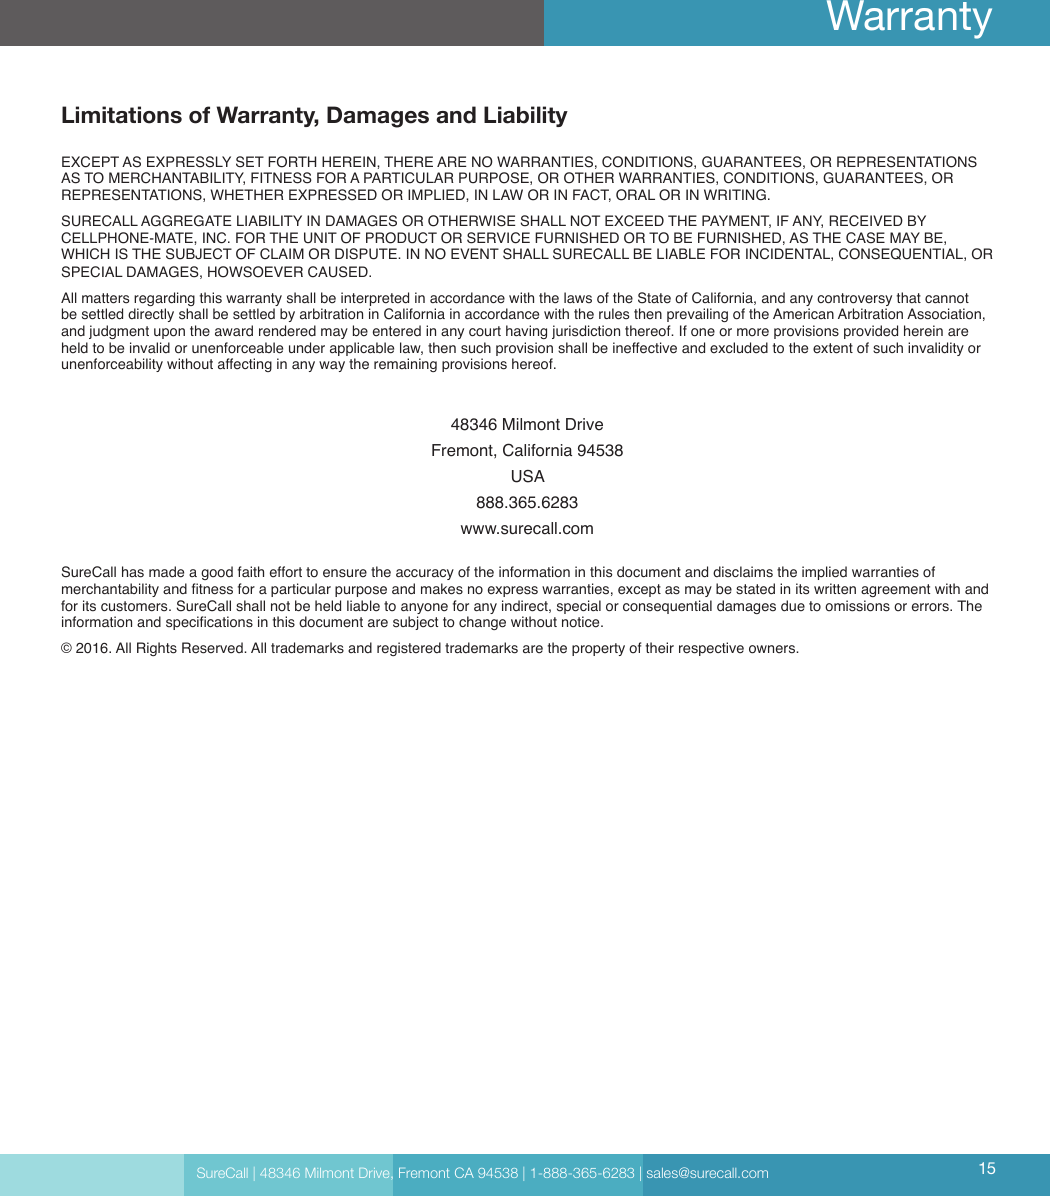 Limitations of Warranty, Damages and LiabilityEXCEPT AS EXPRESSLY SET FORTH HEREIN, THERE ARE NO WARRANTIES, CONDITIONS, GUARANTEES, OR REPRESENTATIONS AS TO MERCHANTABILITY, FITNESS FOR A PARTICULAR PURPOSE, OR OTHER WARRANTIES, CONDITIONS, GUARANTEES, OR REPRESENTATIONS, WHETHER EXPRESSED OR IMPLIED, IN LAW OR IN FACT, ORAL OR IN WRITING.SURECALL AGGREGATE LIABILITY IN DAMAGES OR OTHERWISE SHALL NOT EXCEED THE PAYMENT, IF ANY, RECEIVED BY CELLPHONE-MATE, INC. FOR THE UNIT OF PRODUCT OR SERVICE FURNISHED OR TO BE FURNISHED, AS THE CASE MAY BE, WHICH IS THE SUBJECT OF CLAIM OR DISPUTE. IN NO EVENT SHALL SURECALL BE LIABLE FOR INCIDENTAL, CONSEQUENTIAL, OR SPECIAL DAMAGES, HOWSOEVER CAUSED. All matters regarding this warranty shall be interpreted in accordance with the laws of the State of California, and any controversy that cannot be settled directly shall be settled by arbitration in California in accordance with the rules then prevailing of the American Arbitration Association, and judgment upon the award rendered may be entered in any court having jurisdiction thereof. If one or more provisions provided herein are held to be invalid or unenforceable under applicable law, then such provision shall be ineffective and excluded to the extent of such invalidity or unenforceability without affecting in any way the remaining provisions hereof.48346 Milmont DriveFremont, California 94538USA888.365.6283www.surecall.comSureCall has made a good faith effort to ensure the accuracy of the information in this document and disclaims the implied warranties of merchantability and tness for a particular purpose and makes no express warranties, except as may be stated in its written agreement with and for its customers. SureCall shall not be held liable to anyone for any indirect, special or consequential damages due to omissions or errors. The information and specications in this document are subject to change without notice. © 2016. All Rights Reserved. All trademarks and registered trademarks are the property of their respective owners.SureCall | 48346 Milmont Drive, Fremont CA 94538 | 1-888-365-6283 | sales@surecall.com 15Warranty